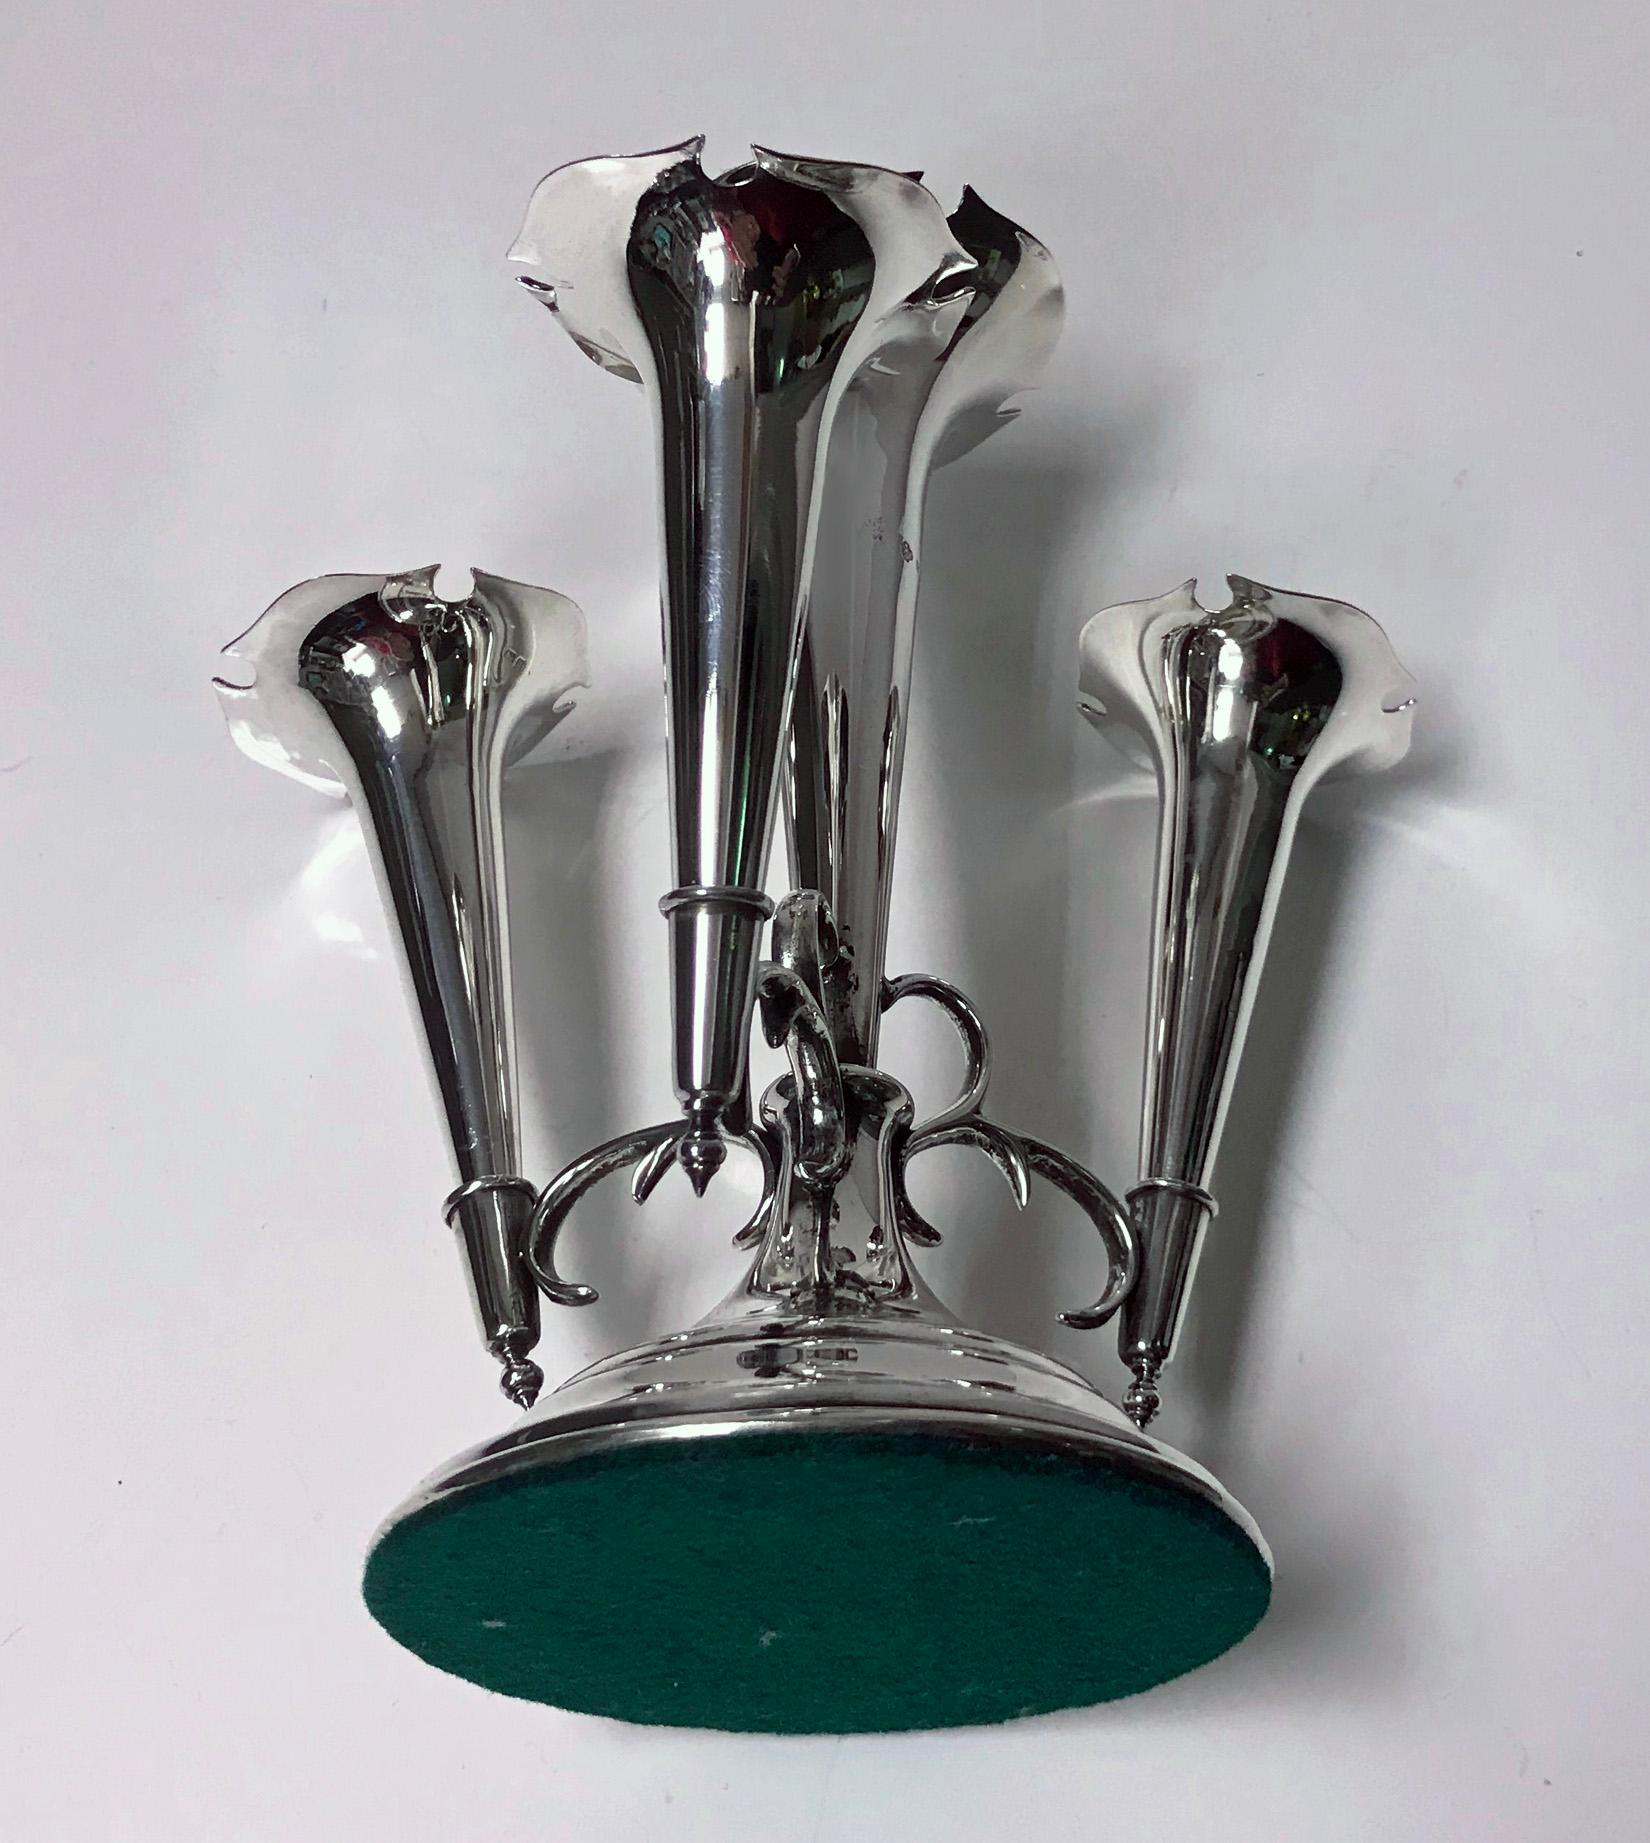 Antique Silver Epergne, Birmingham 1906, William Hutton and Sons. The epergne with four tapered trumpet vases on circular base. Measures: Height 8 inches. Gross weight: 15 oz. (loaded base).